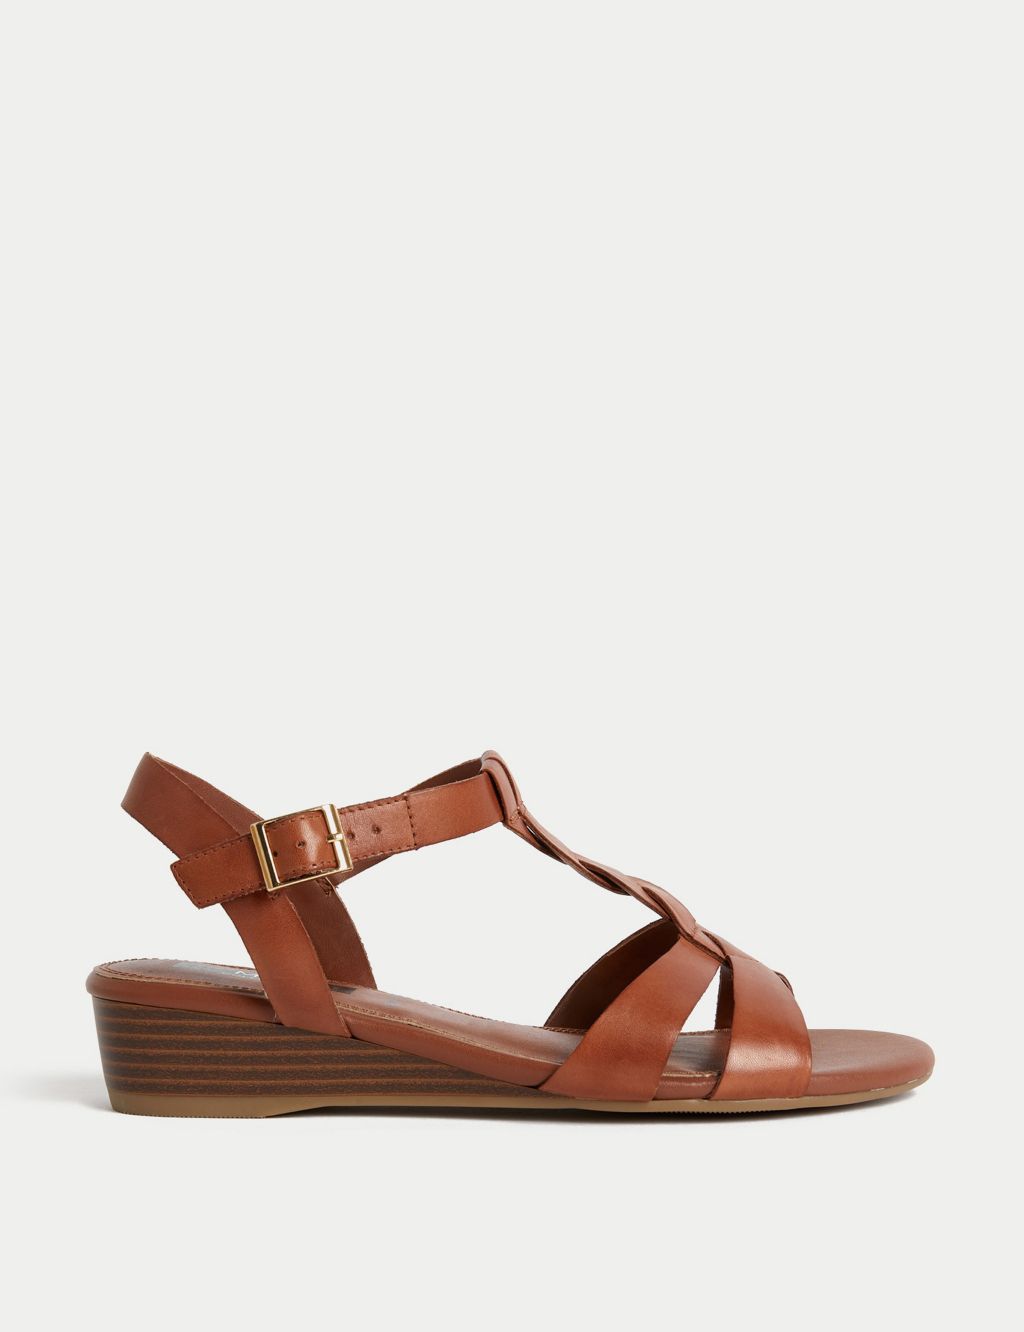 Wide Fit Leather Wedge Sandals Mid image 1